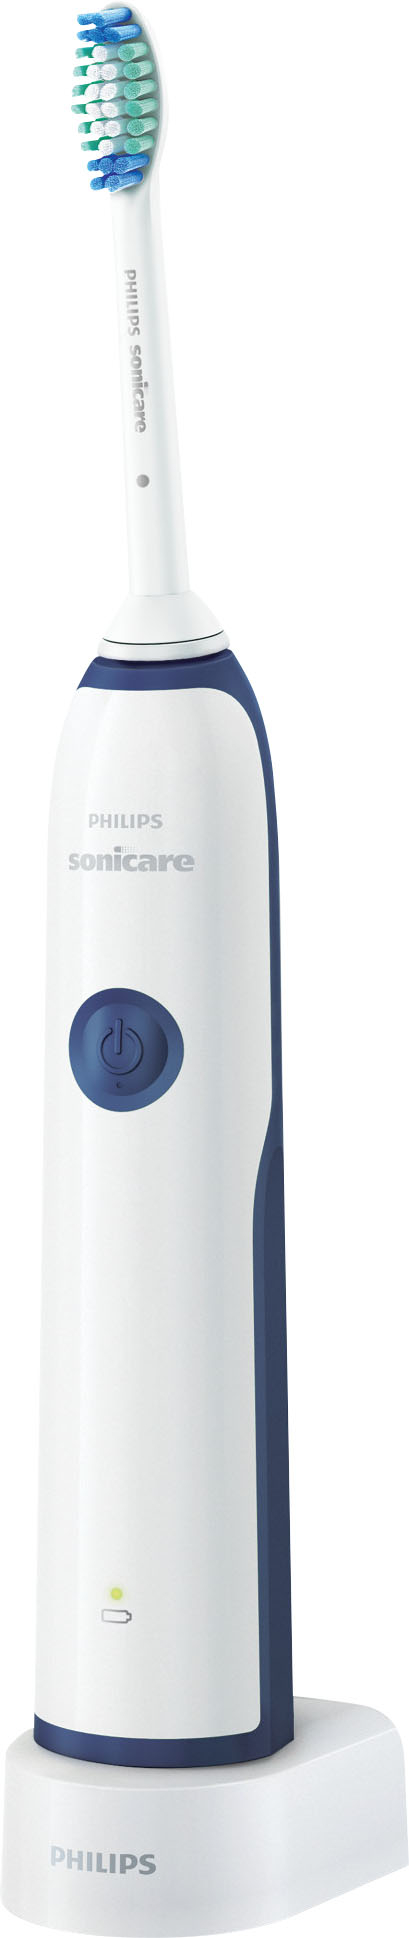 Angle View: Philips Sonicare - Sonicare UV Sanitizer